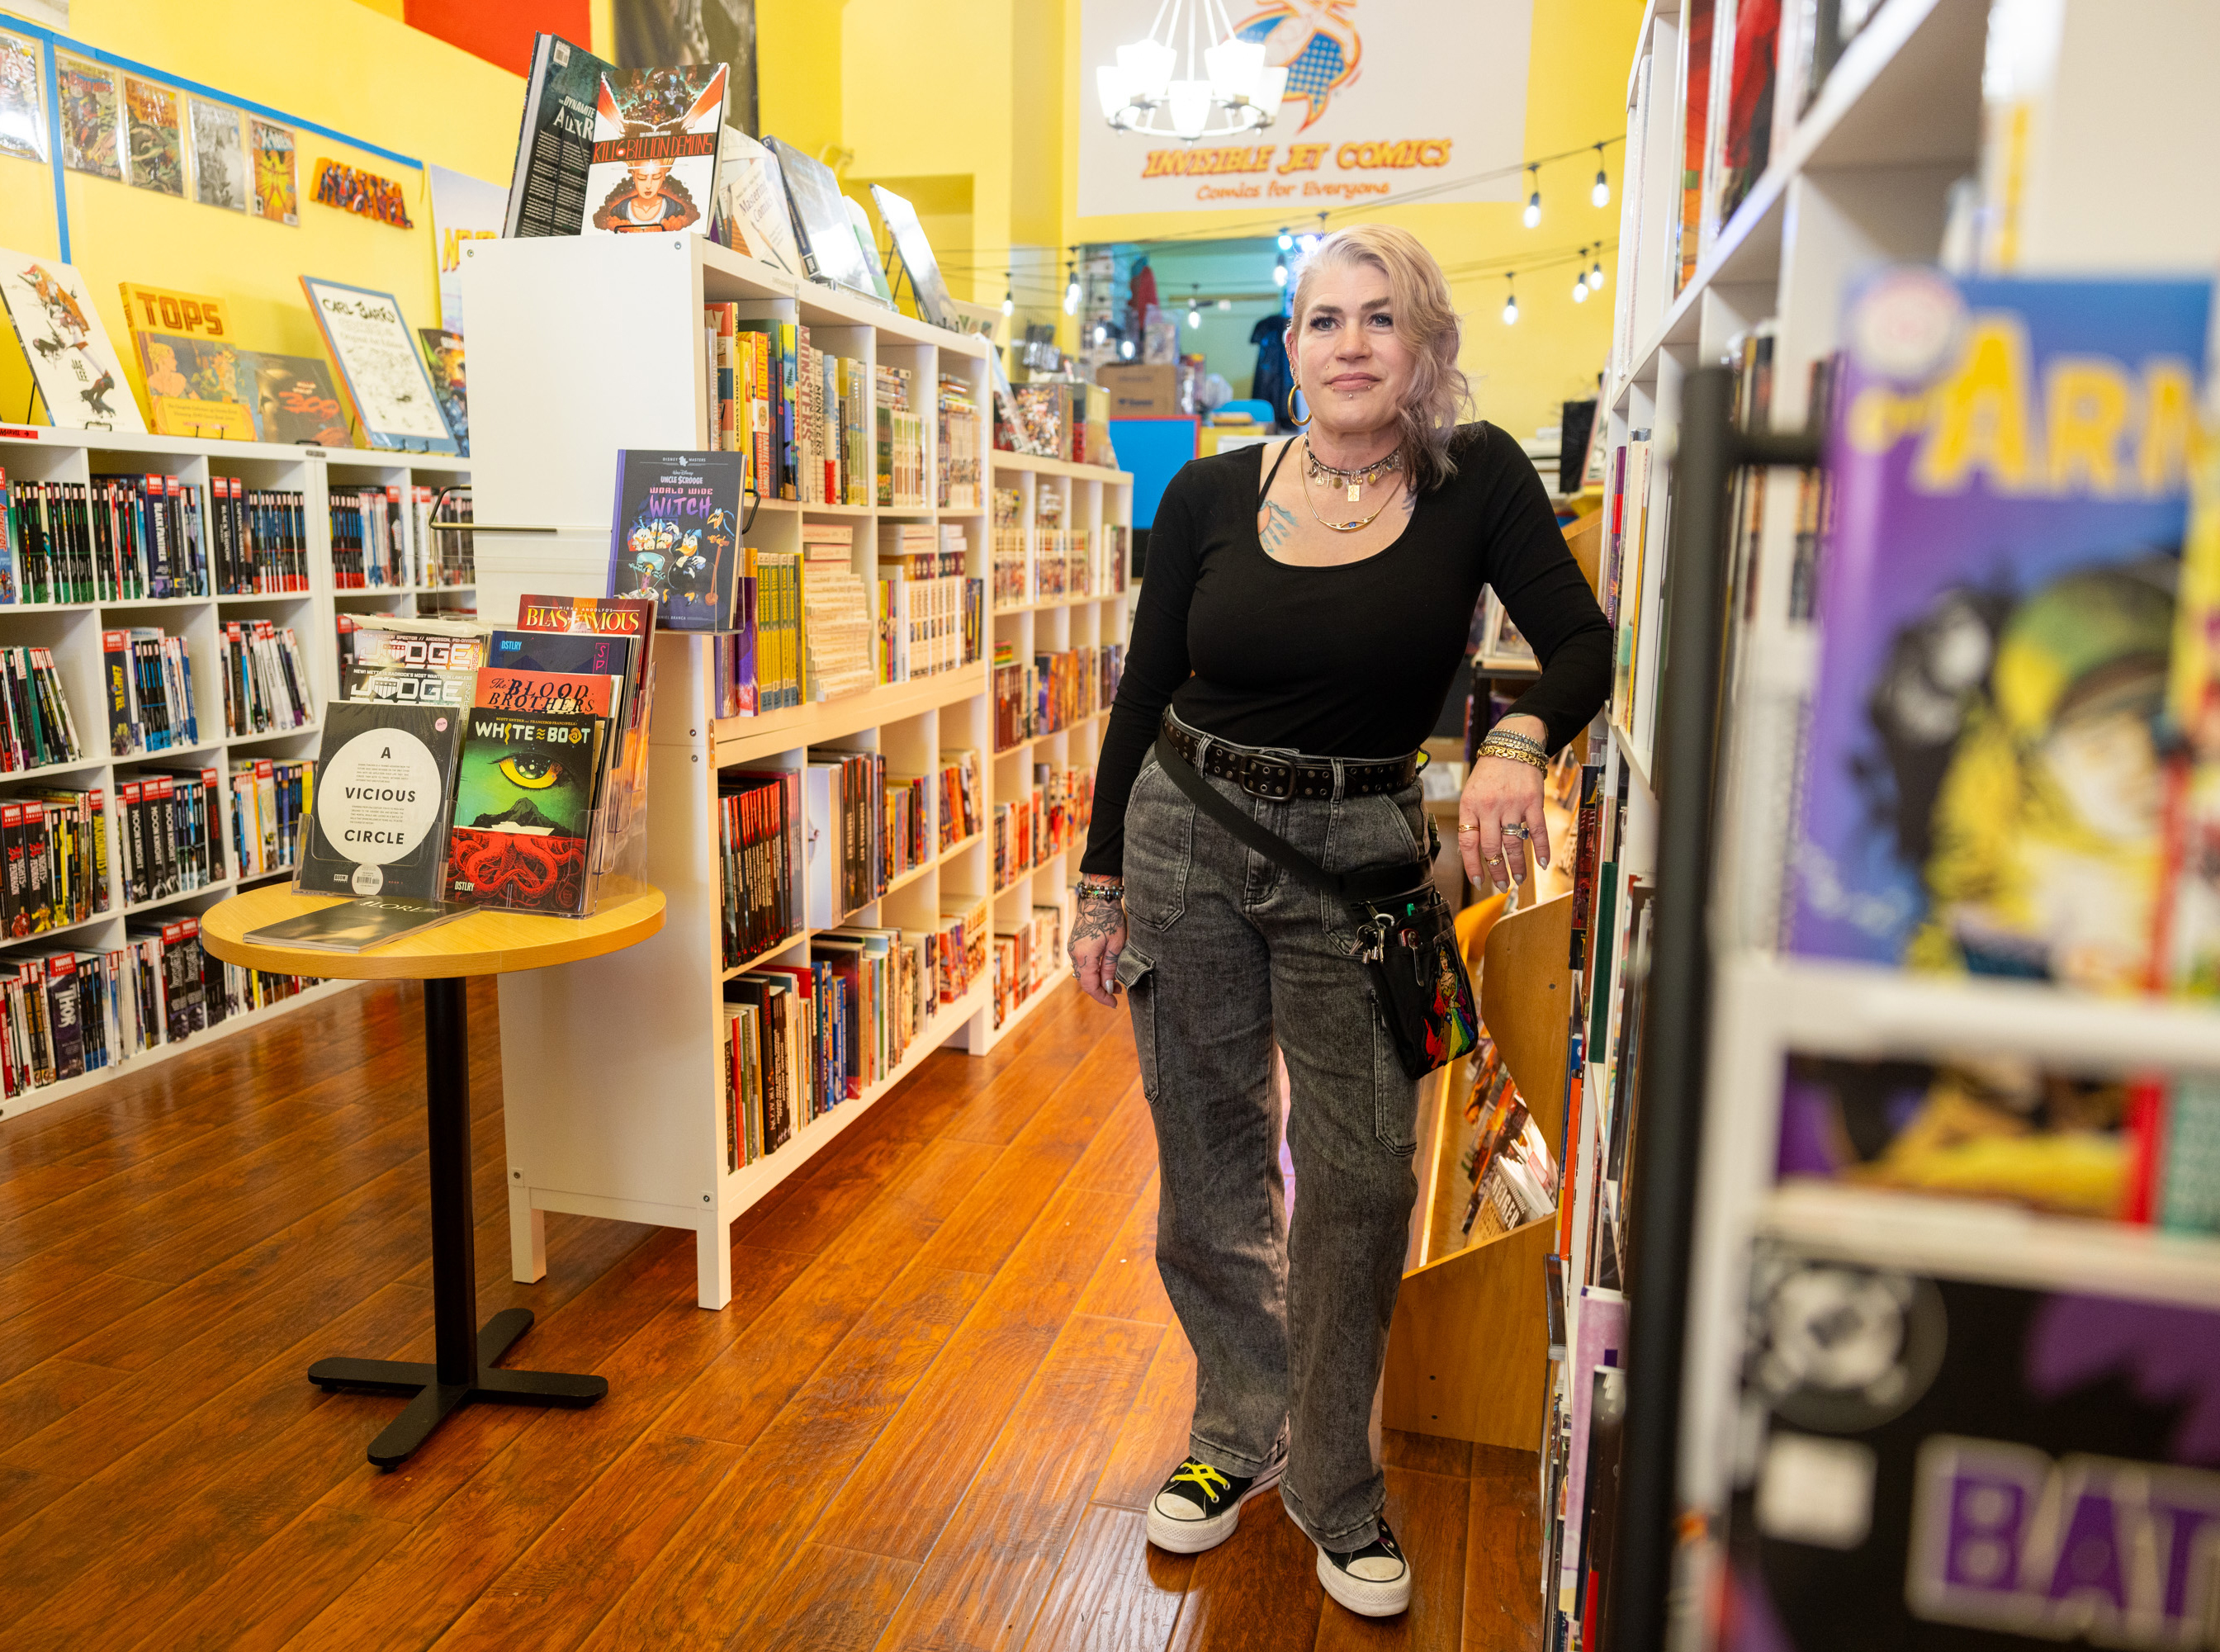 A person with light purple hair stands in a comic book store next to a shelf filled with books, with vibrant decor and organized displays around them.